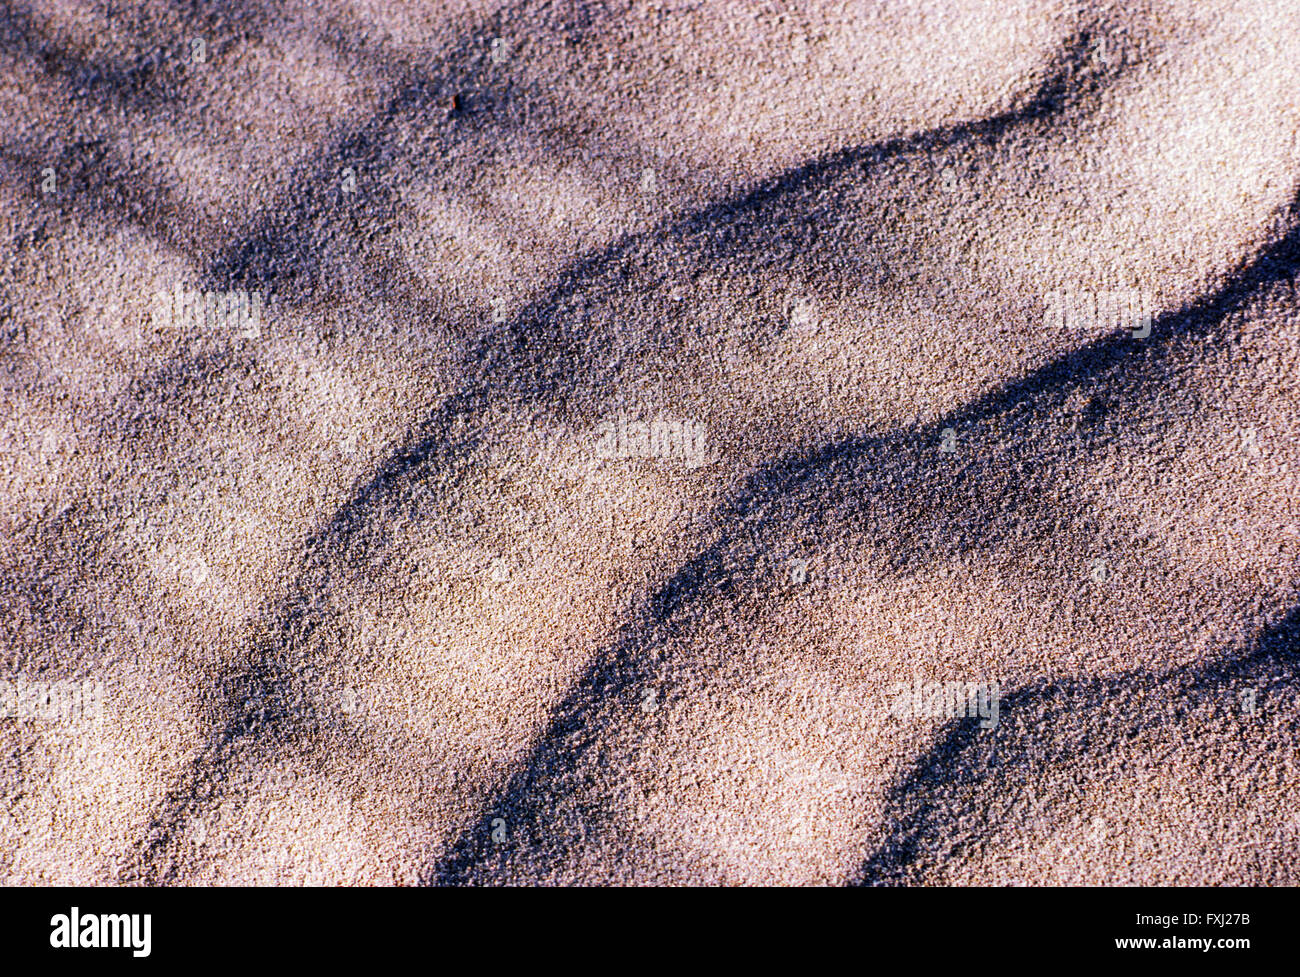 Detailed close-up of sunlit patterns in beach sand Stock Photo